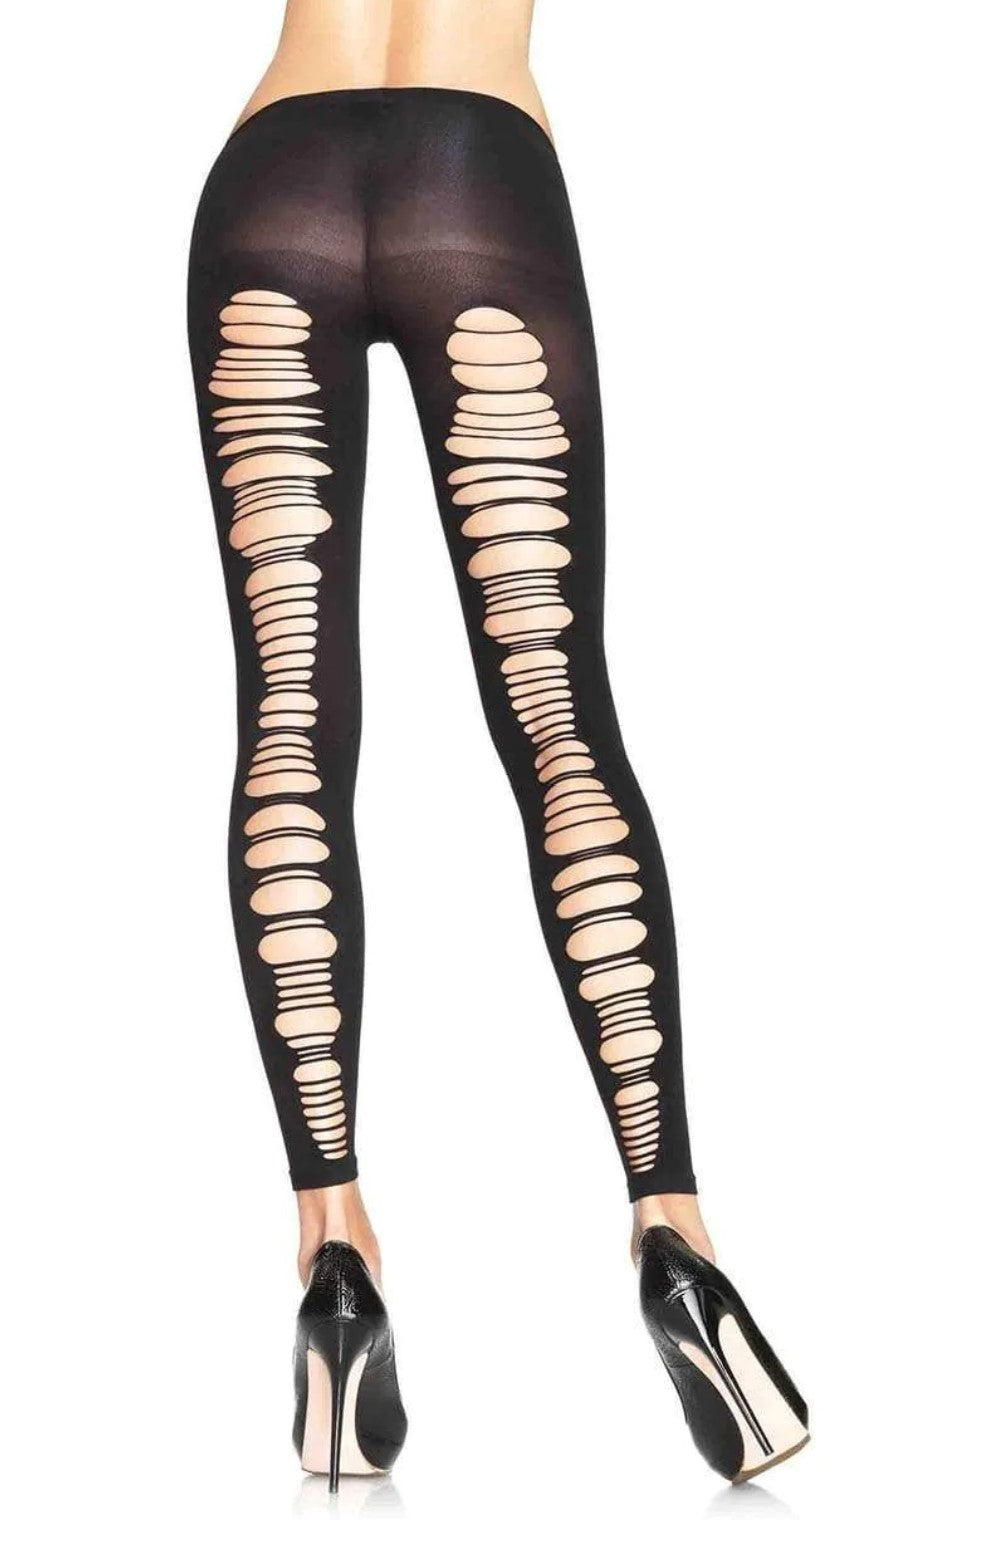 Spandex shredded back opaque footless tights